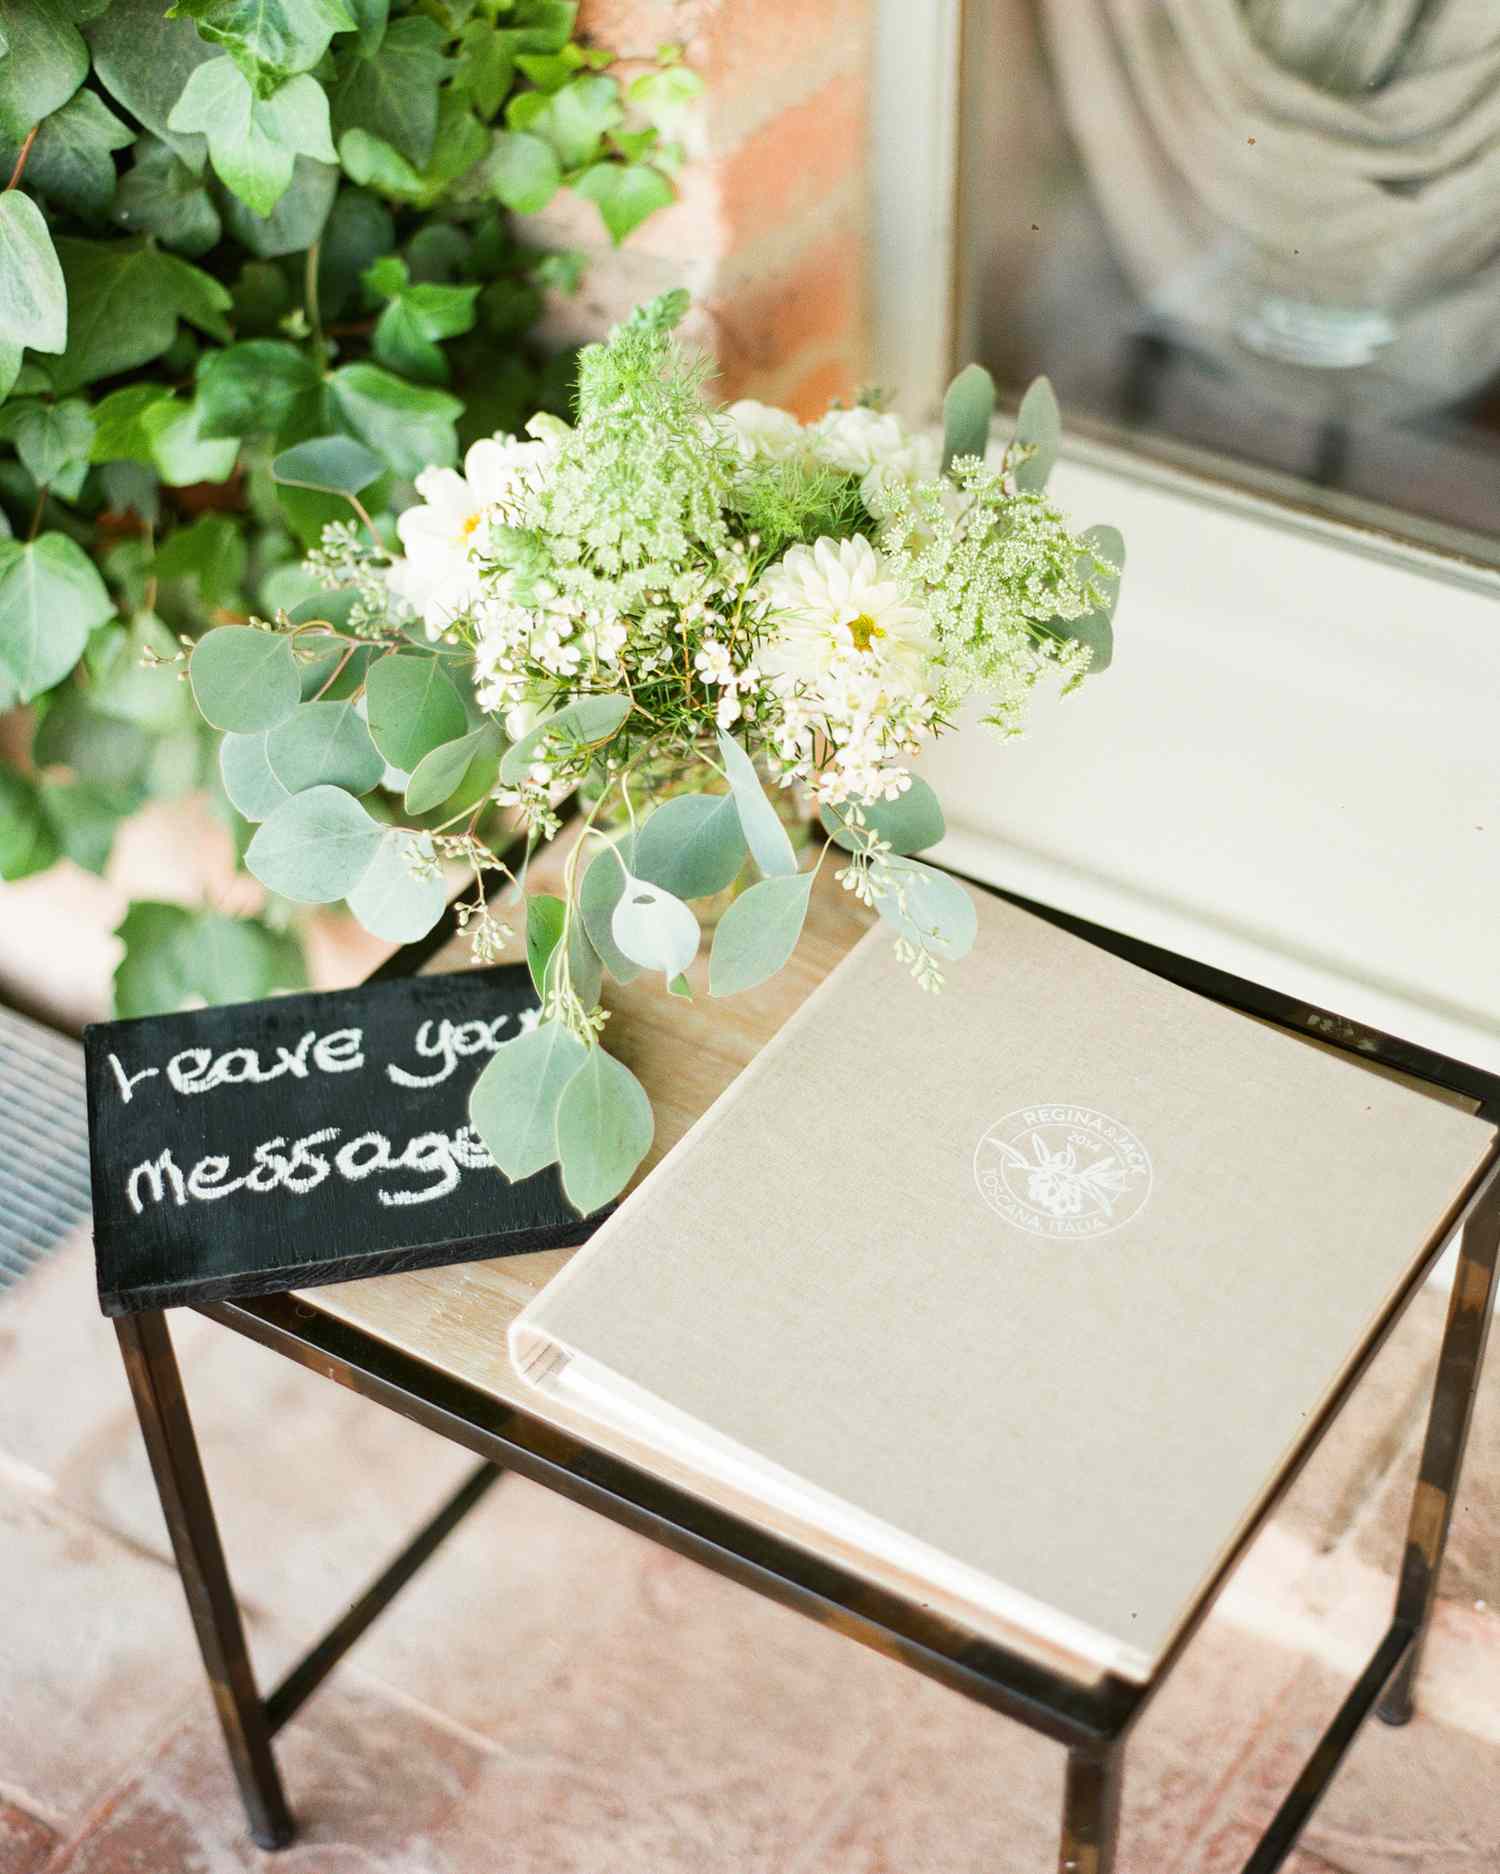 The Guest Book